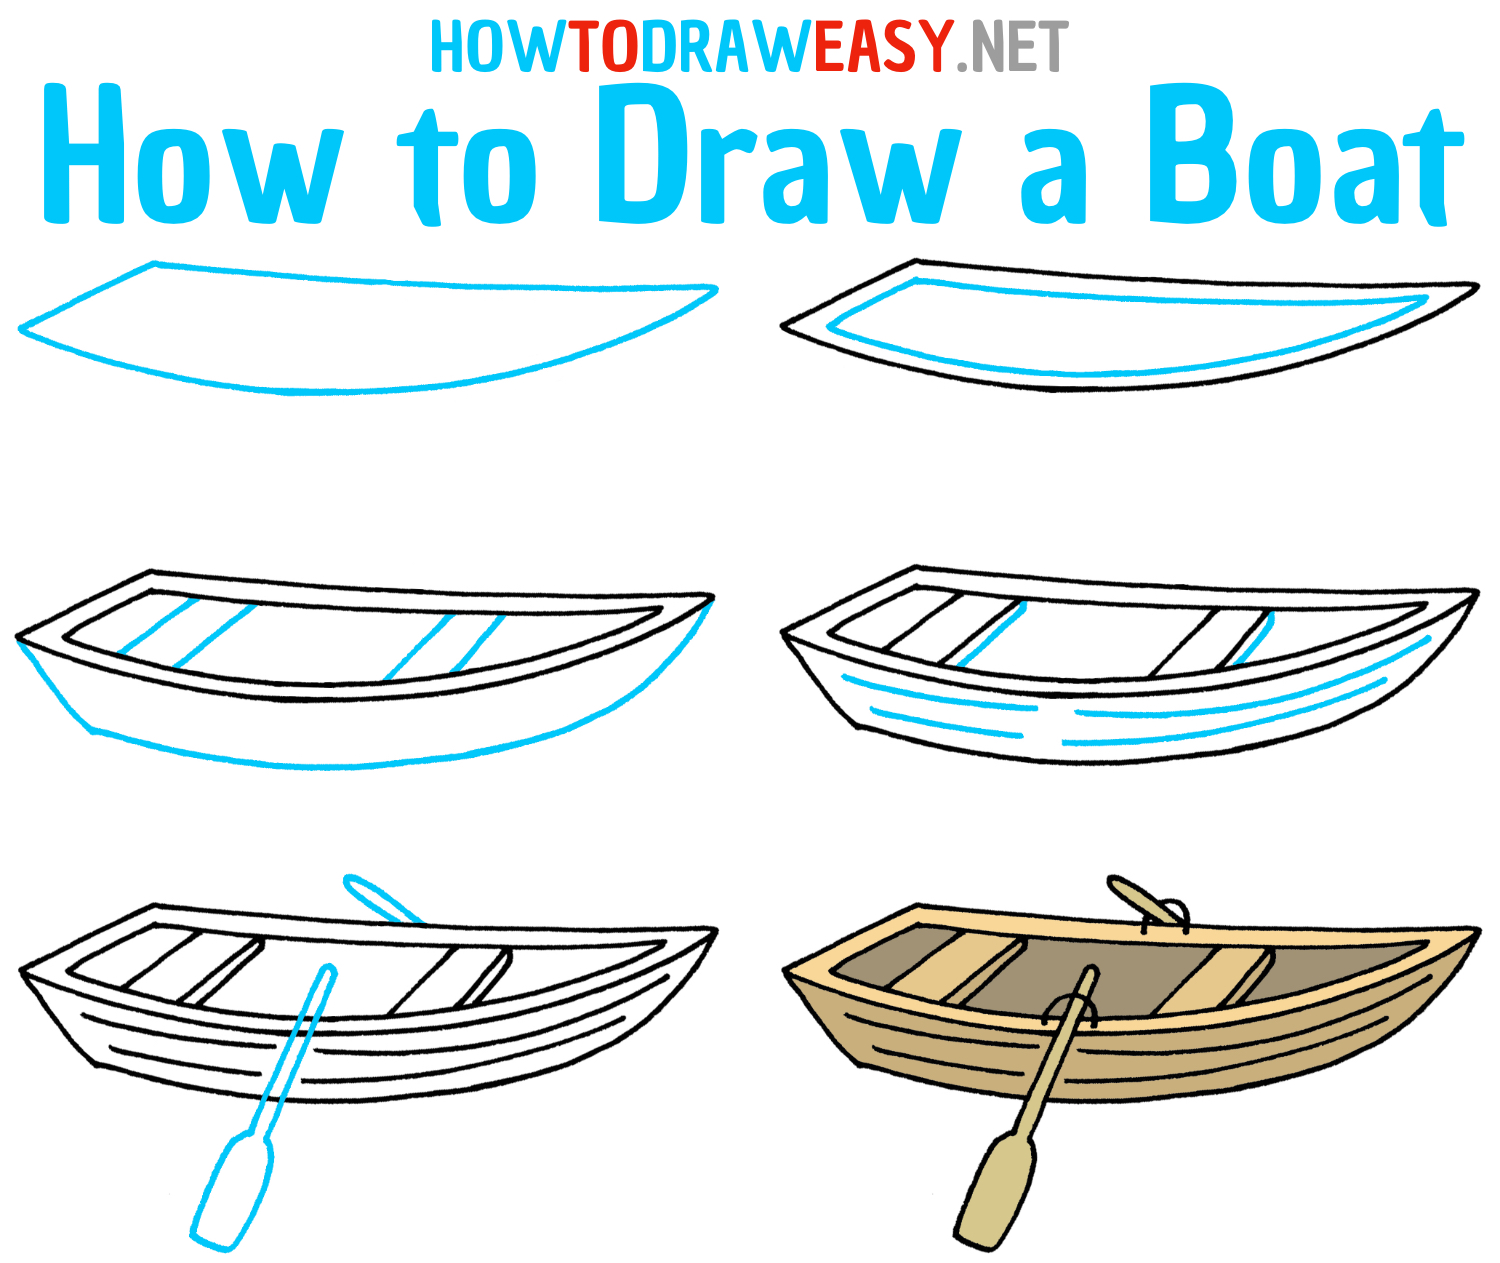 Boat Coloring Book: A Fun And Easy Boat Coloring Workbook For Boys And  Girls. Awesome Boat Coloring Pages For Kids, Adults, Boys, And Boat Lovers. Boat  Drawing, Coloring & Activity Book. :